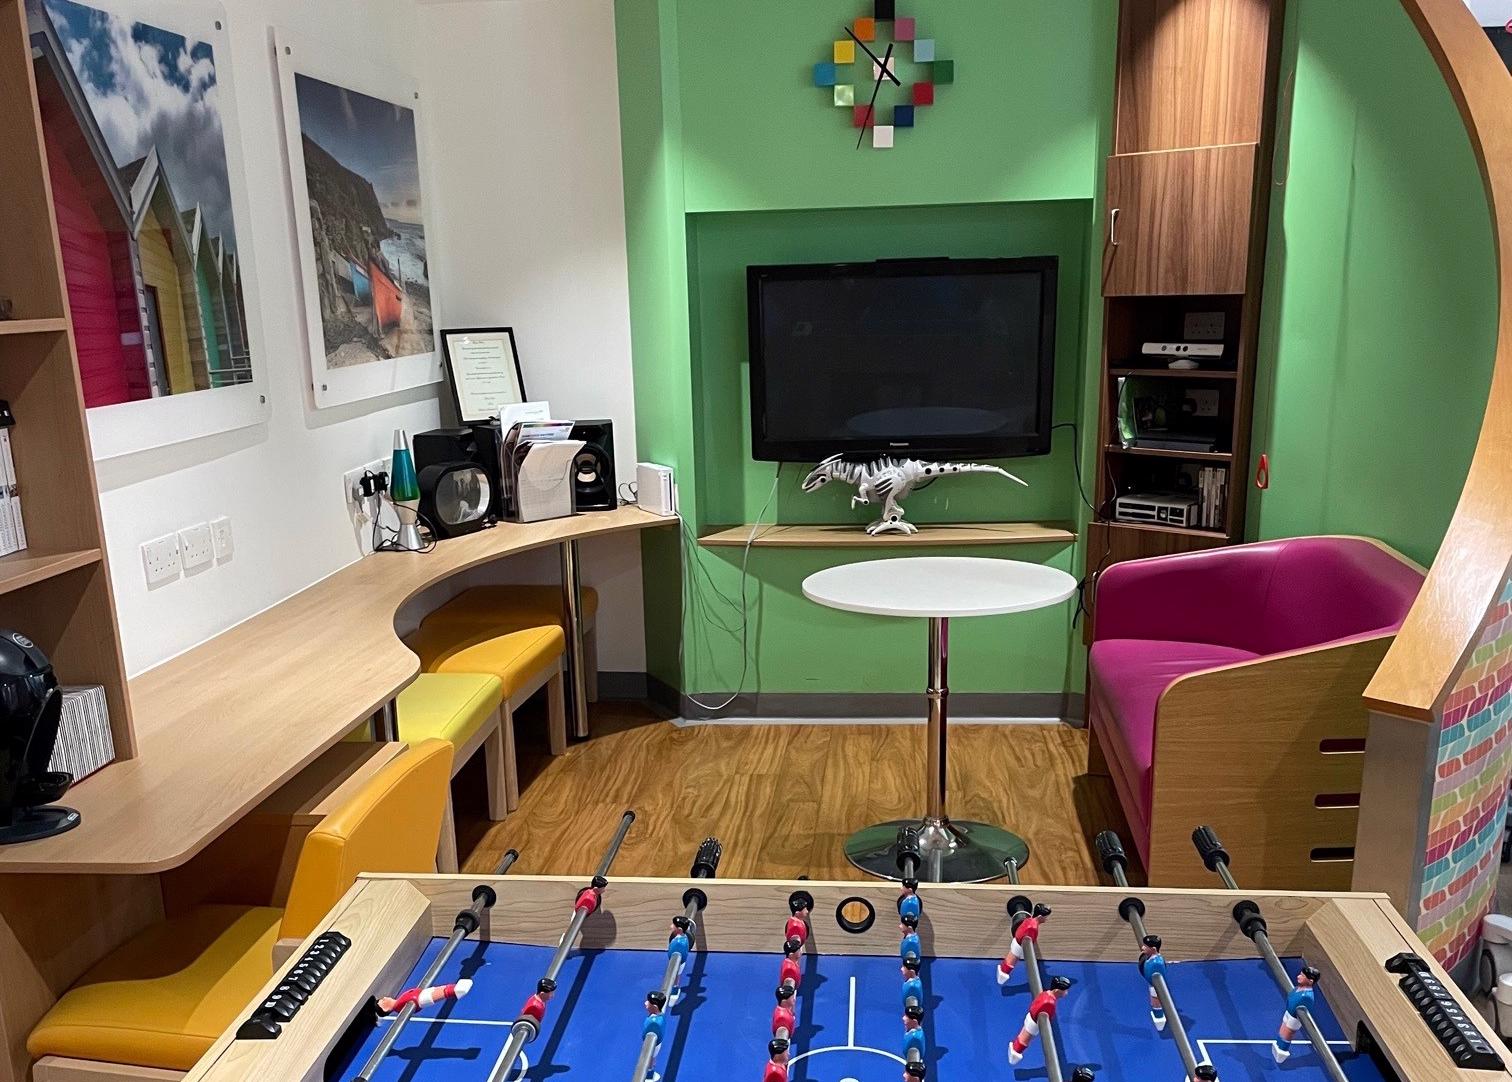 Inside ward E2 showing table football, seating areas, a television screen and dinosaur model.